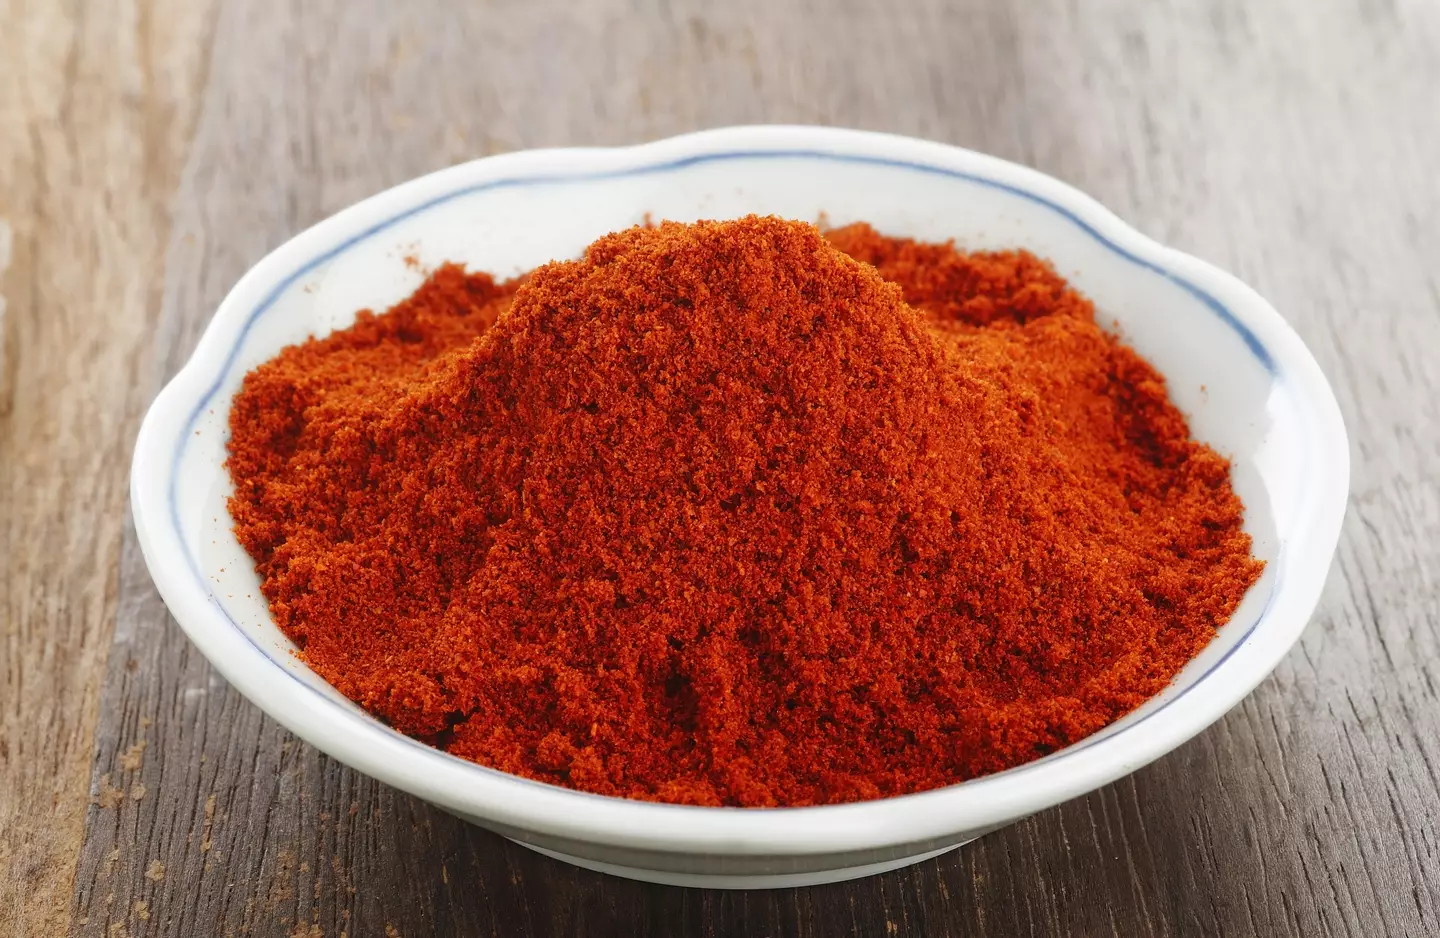 It's arguably one of the most versatile - and delicious - spices.